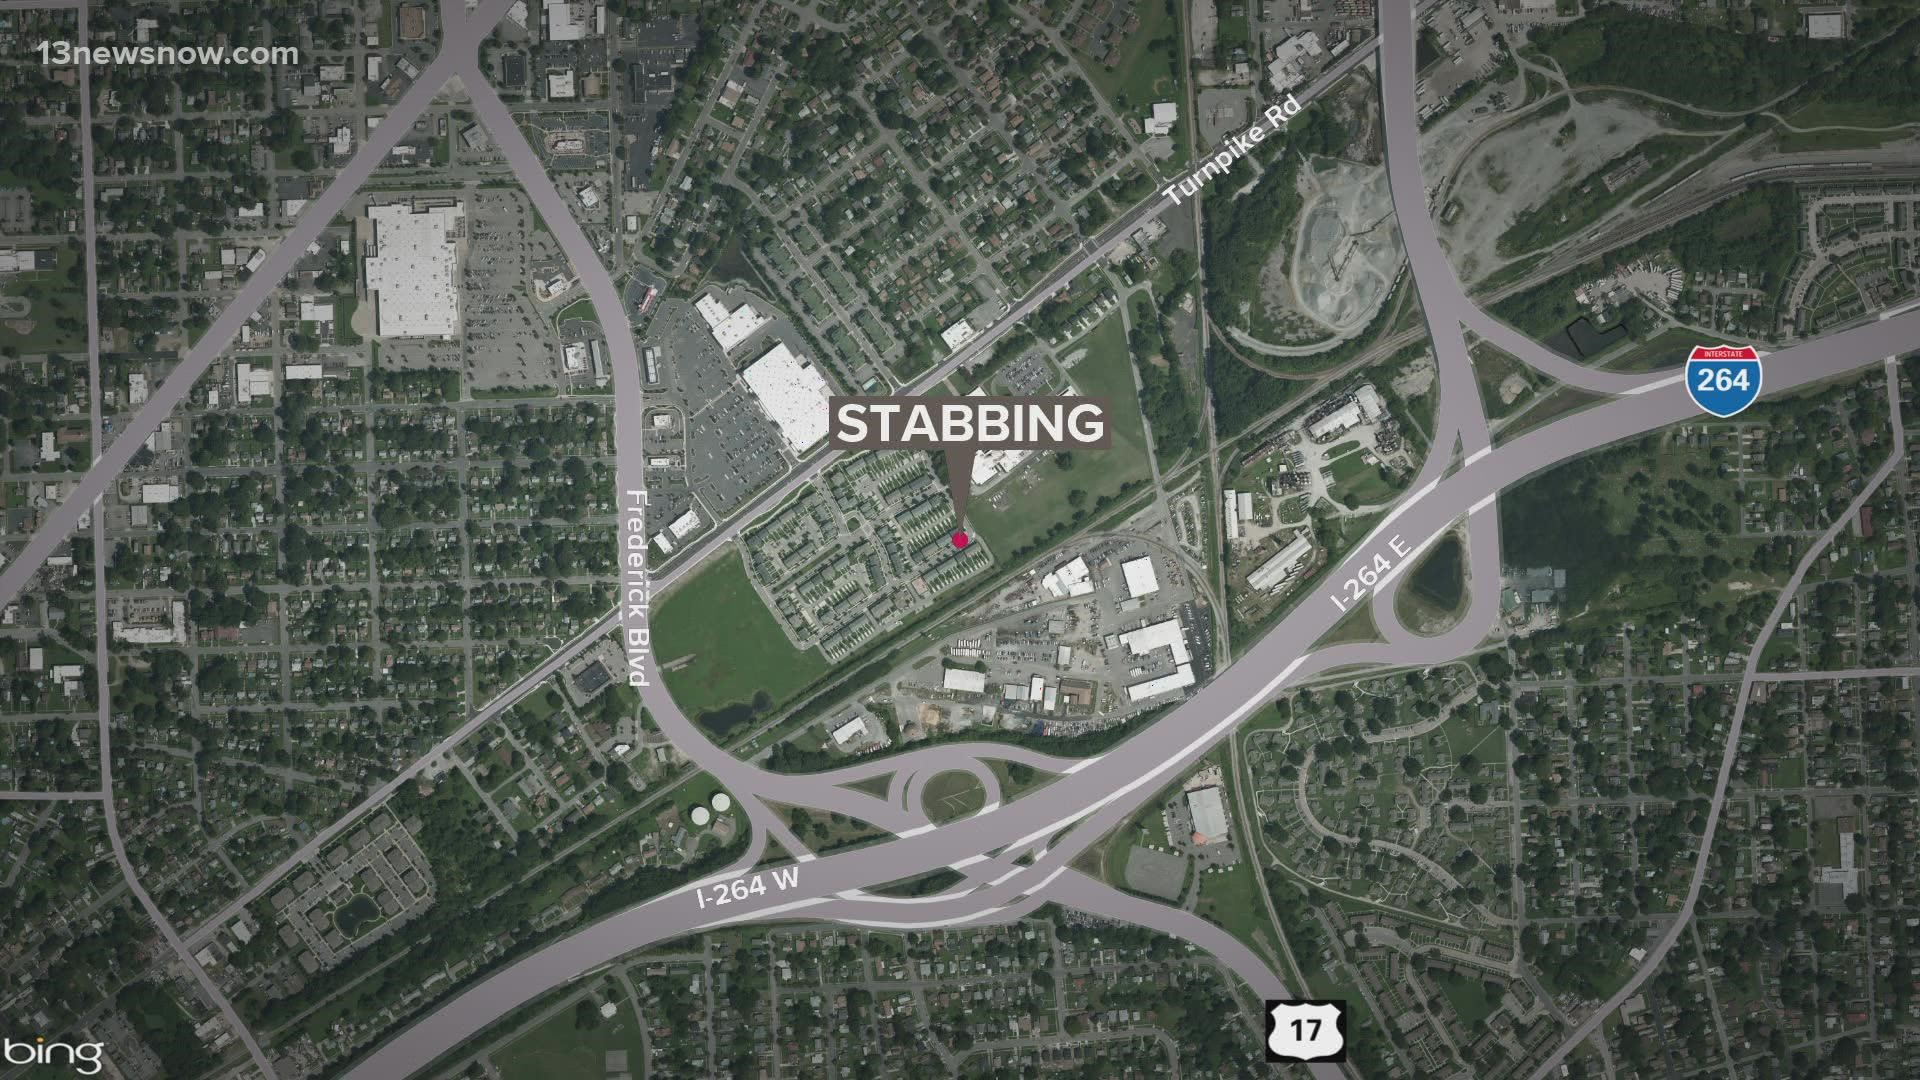 Authorities are investigating a stabbing that injured a man and woman on Berkley Avenue on Saturday.